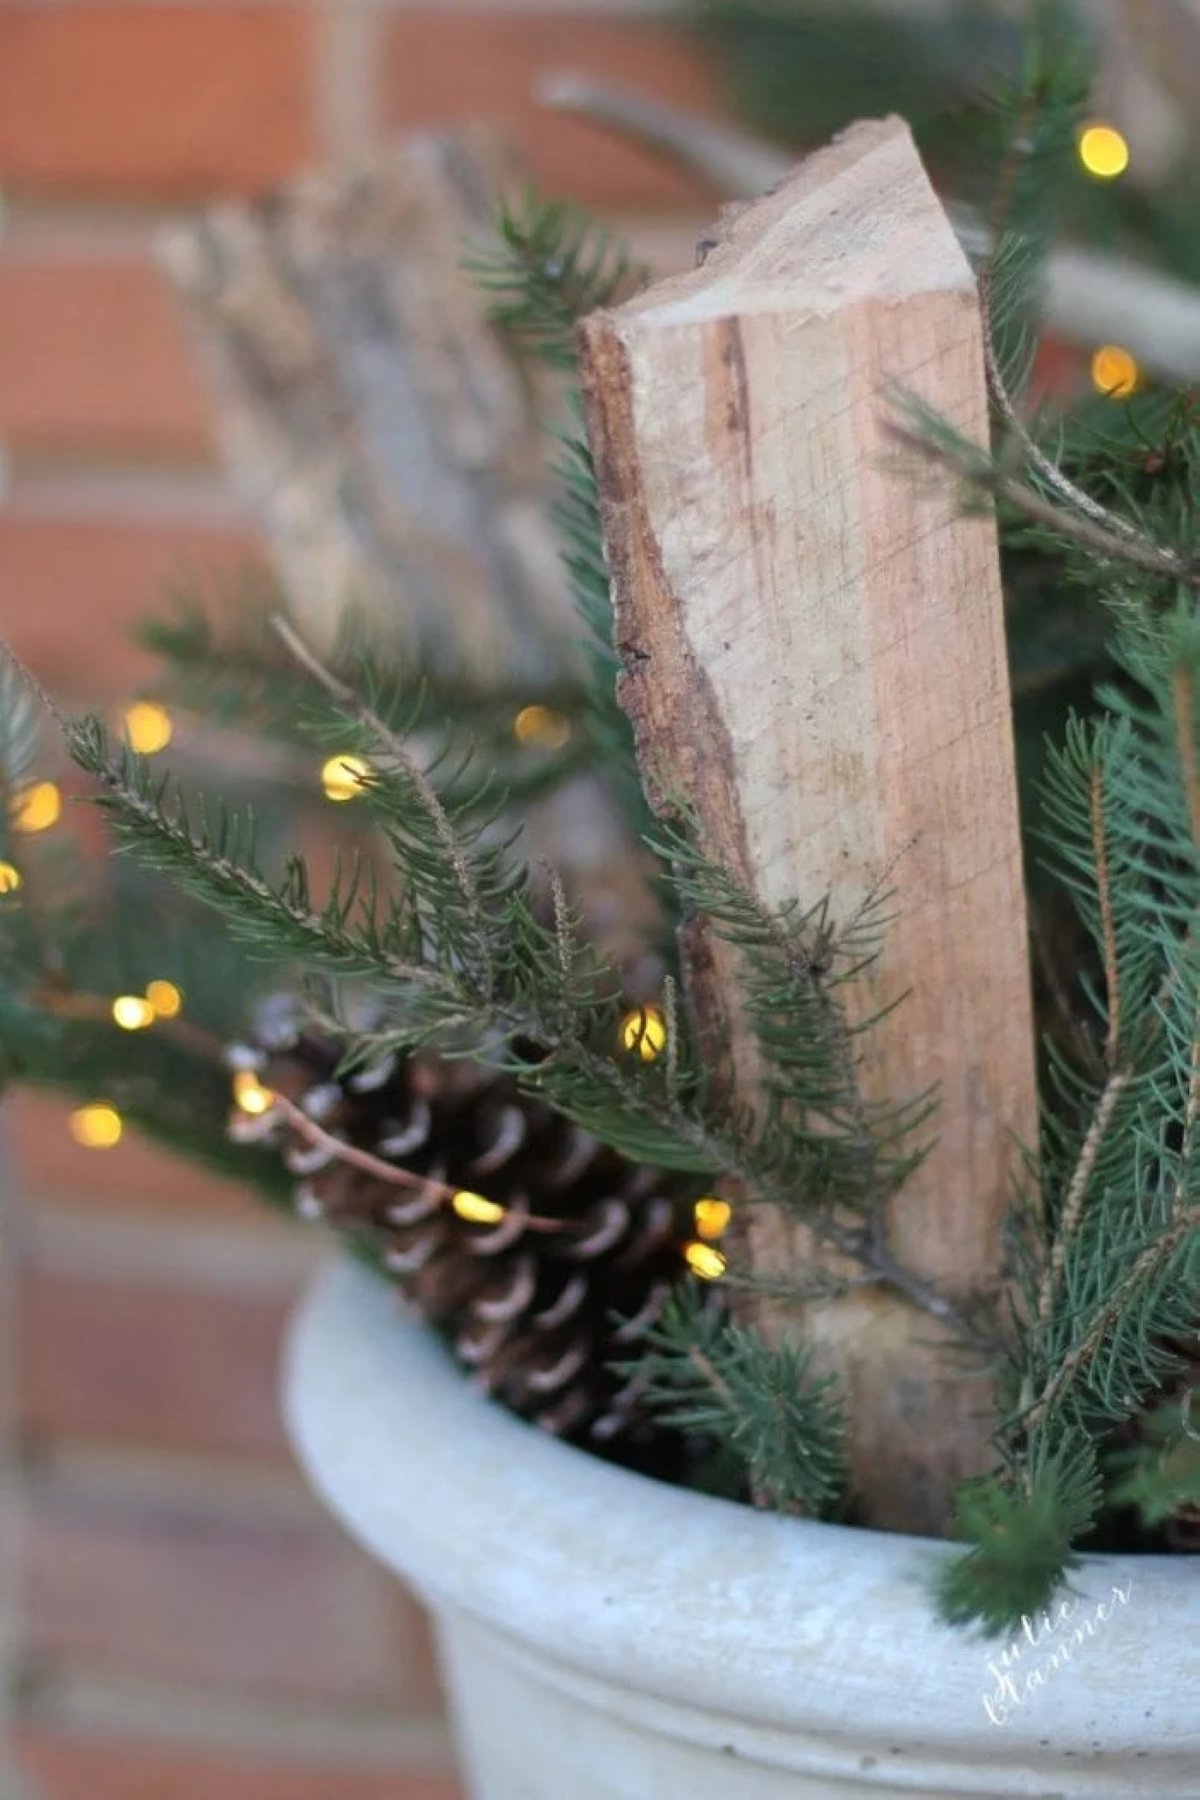 A winter planter for front porch with cut firewood, evergreens, pine cones and fairy lights